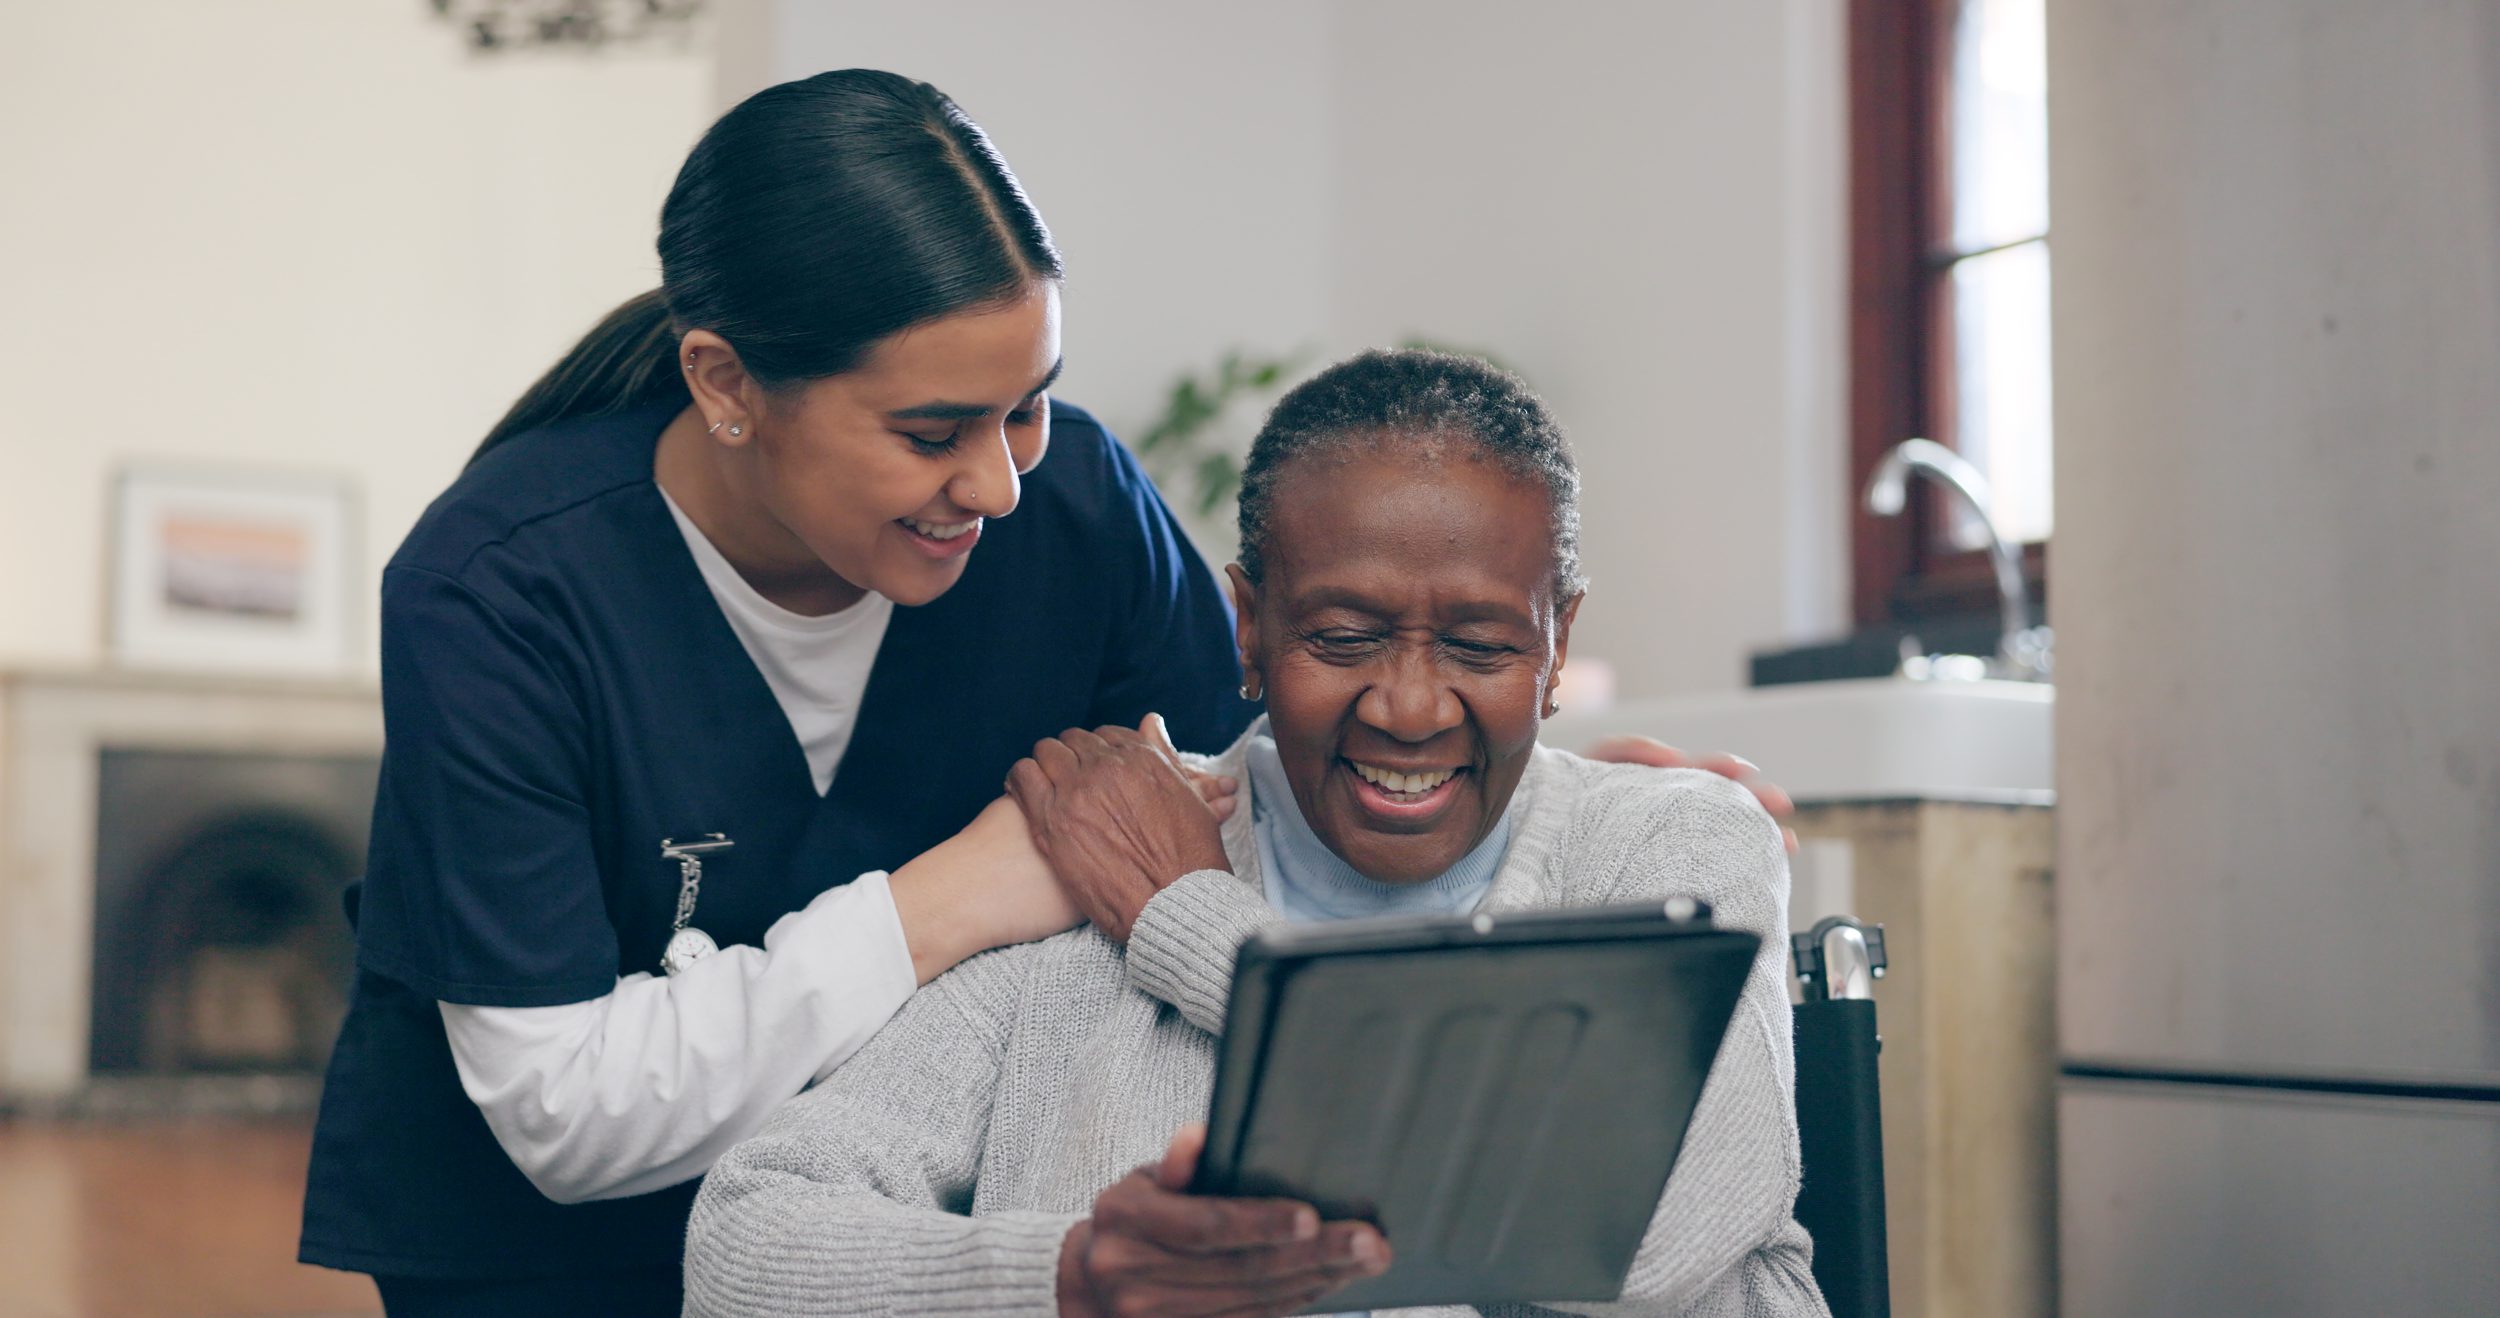 Enterprise computer for healthcare Tablet, discussion and nurse with patient for research on medical diagnosis in nursing home.